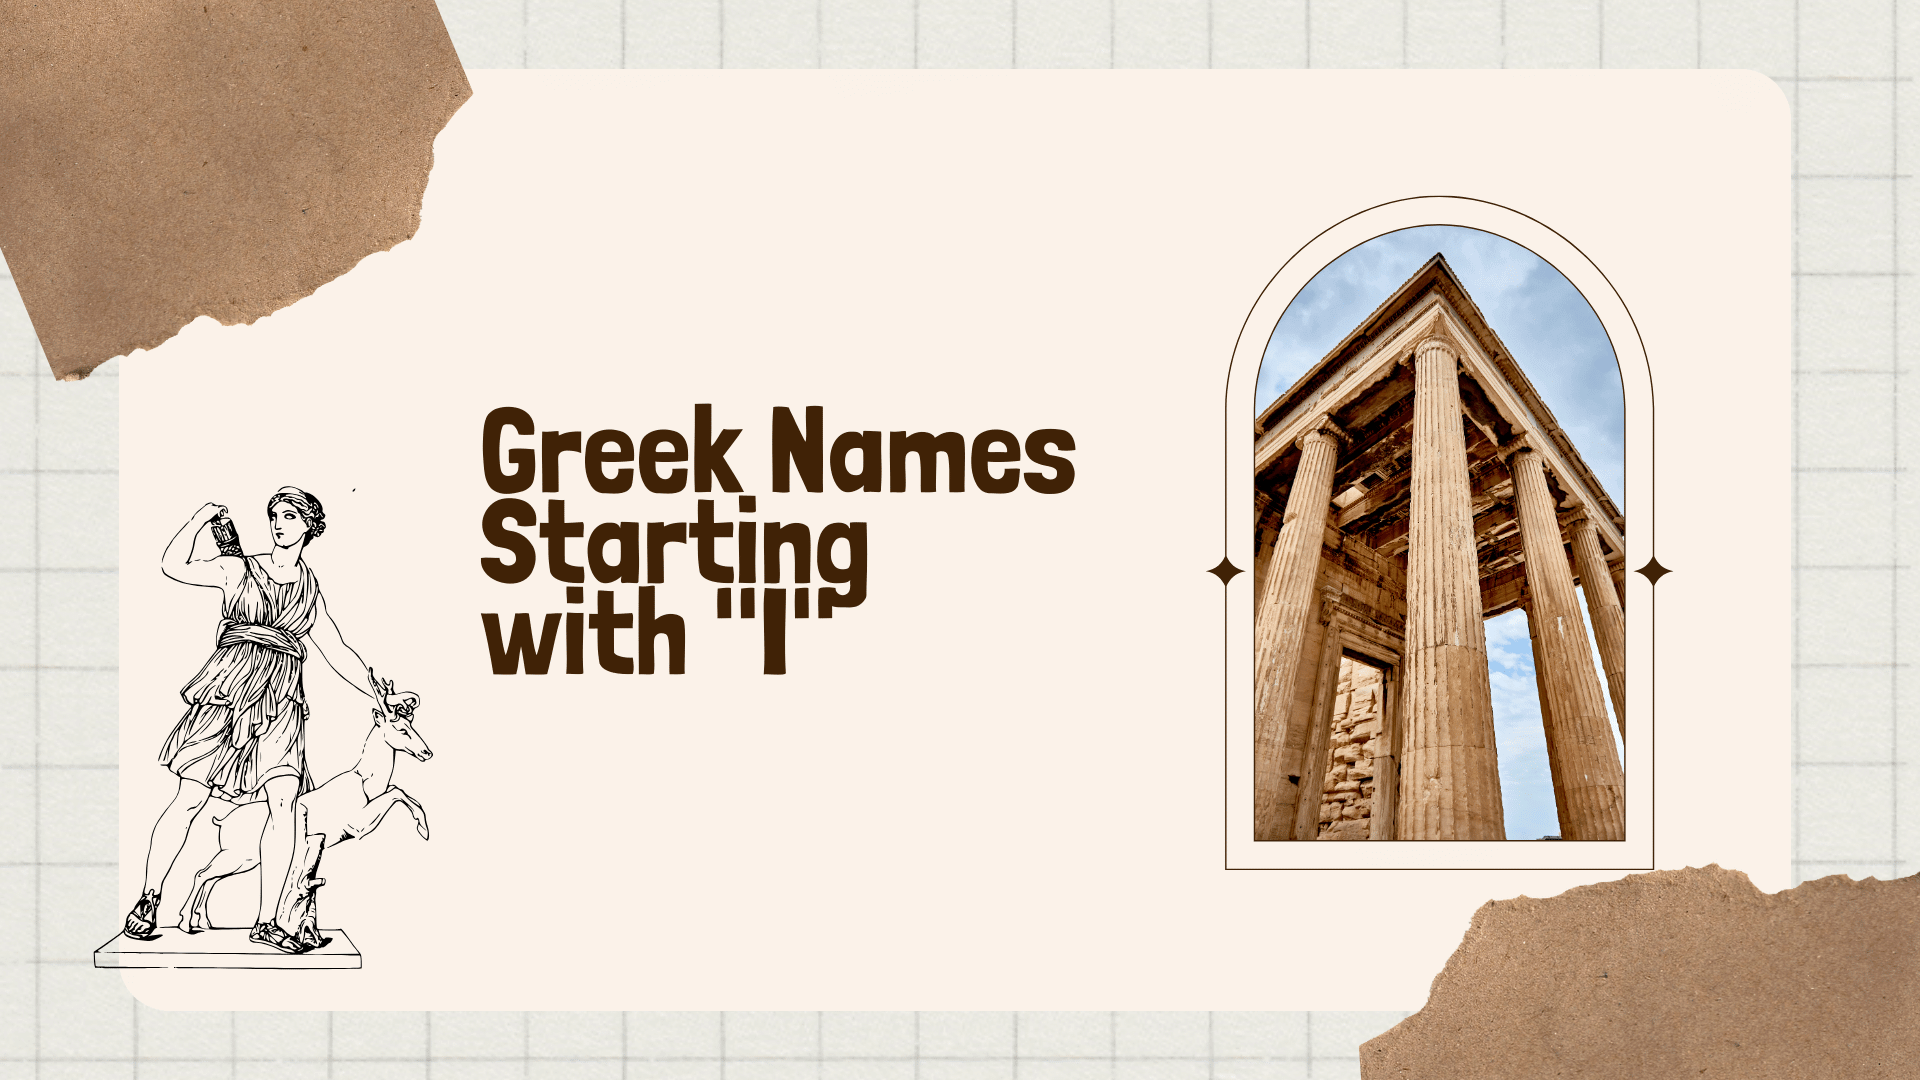 Greek Names Starting With "I"